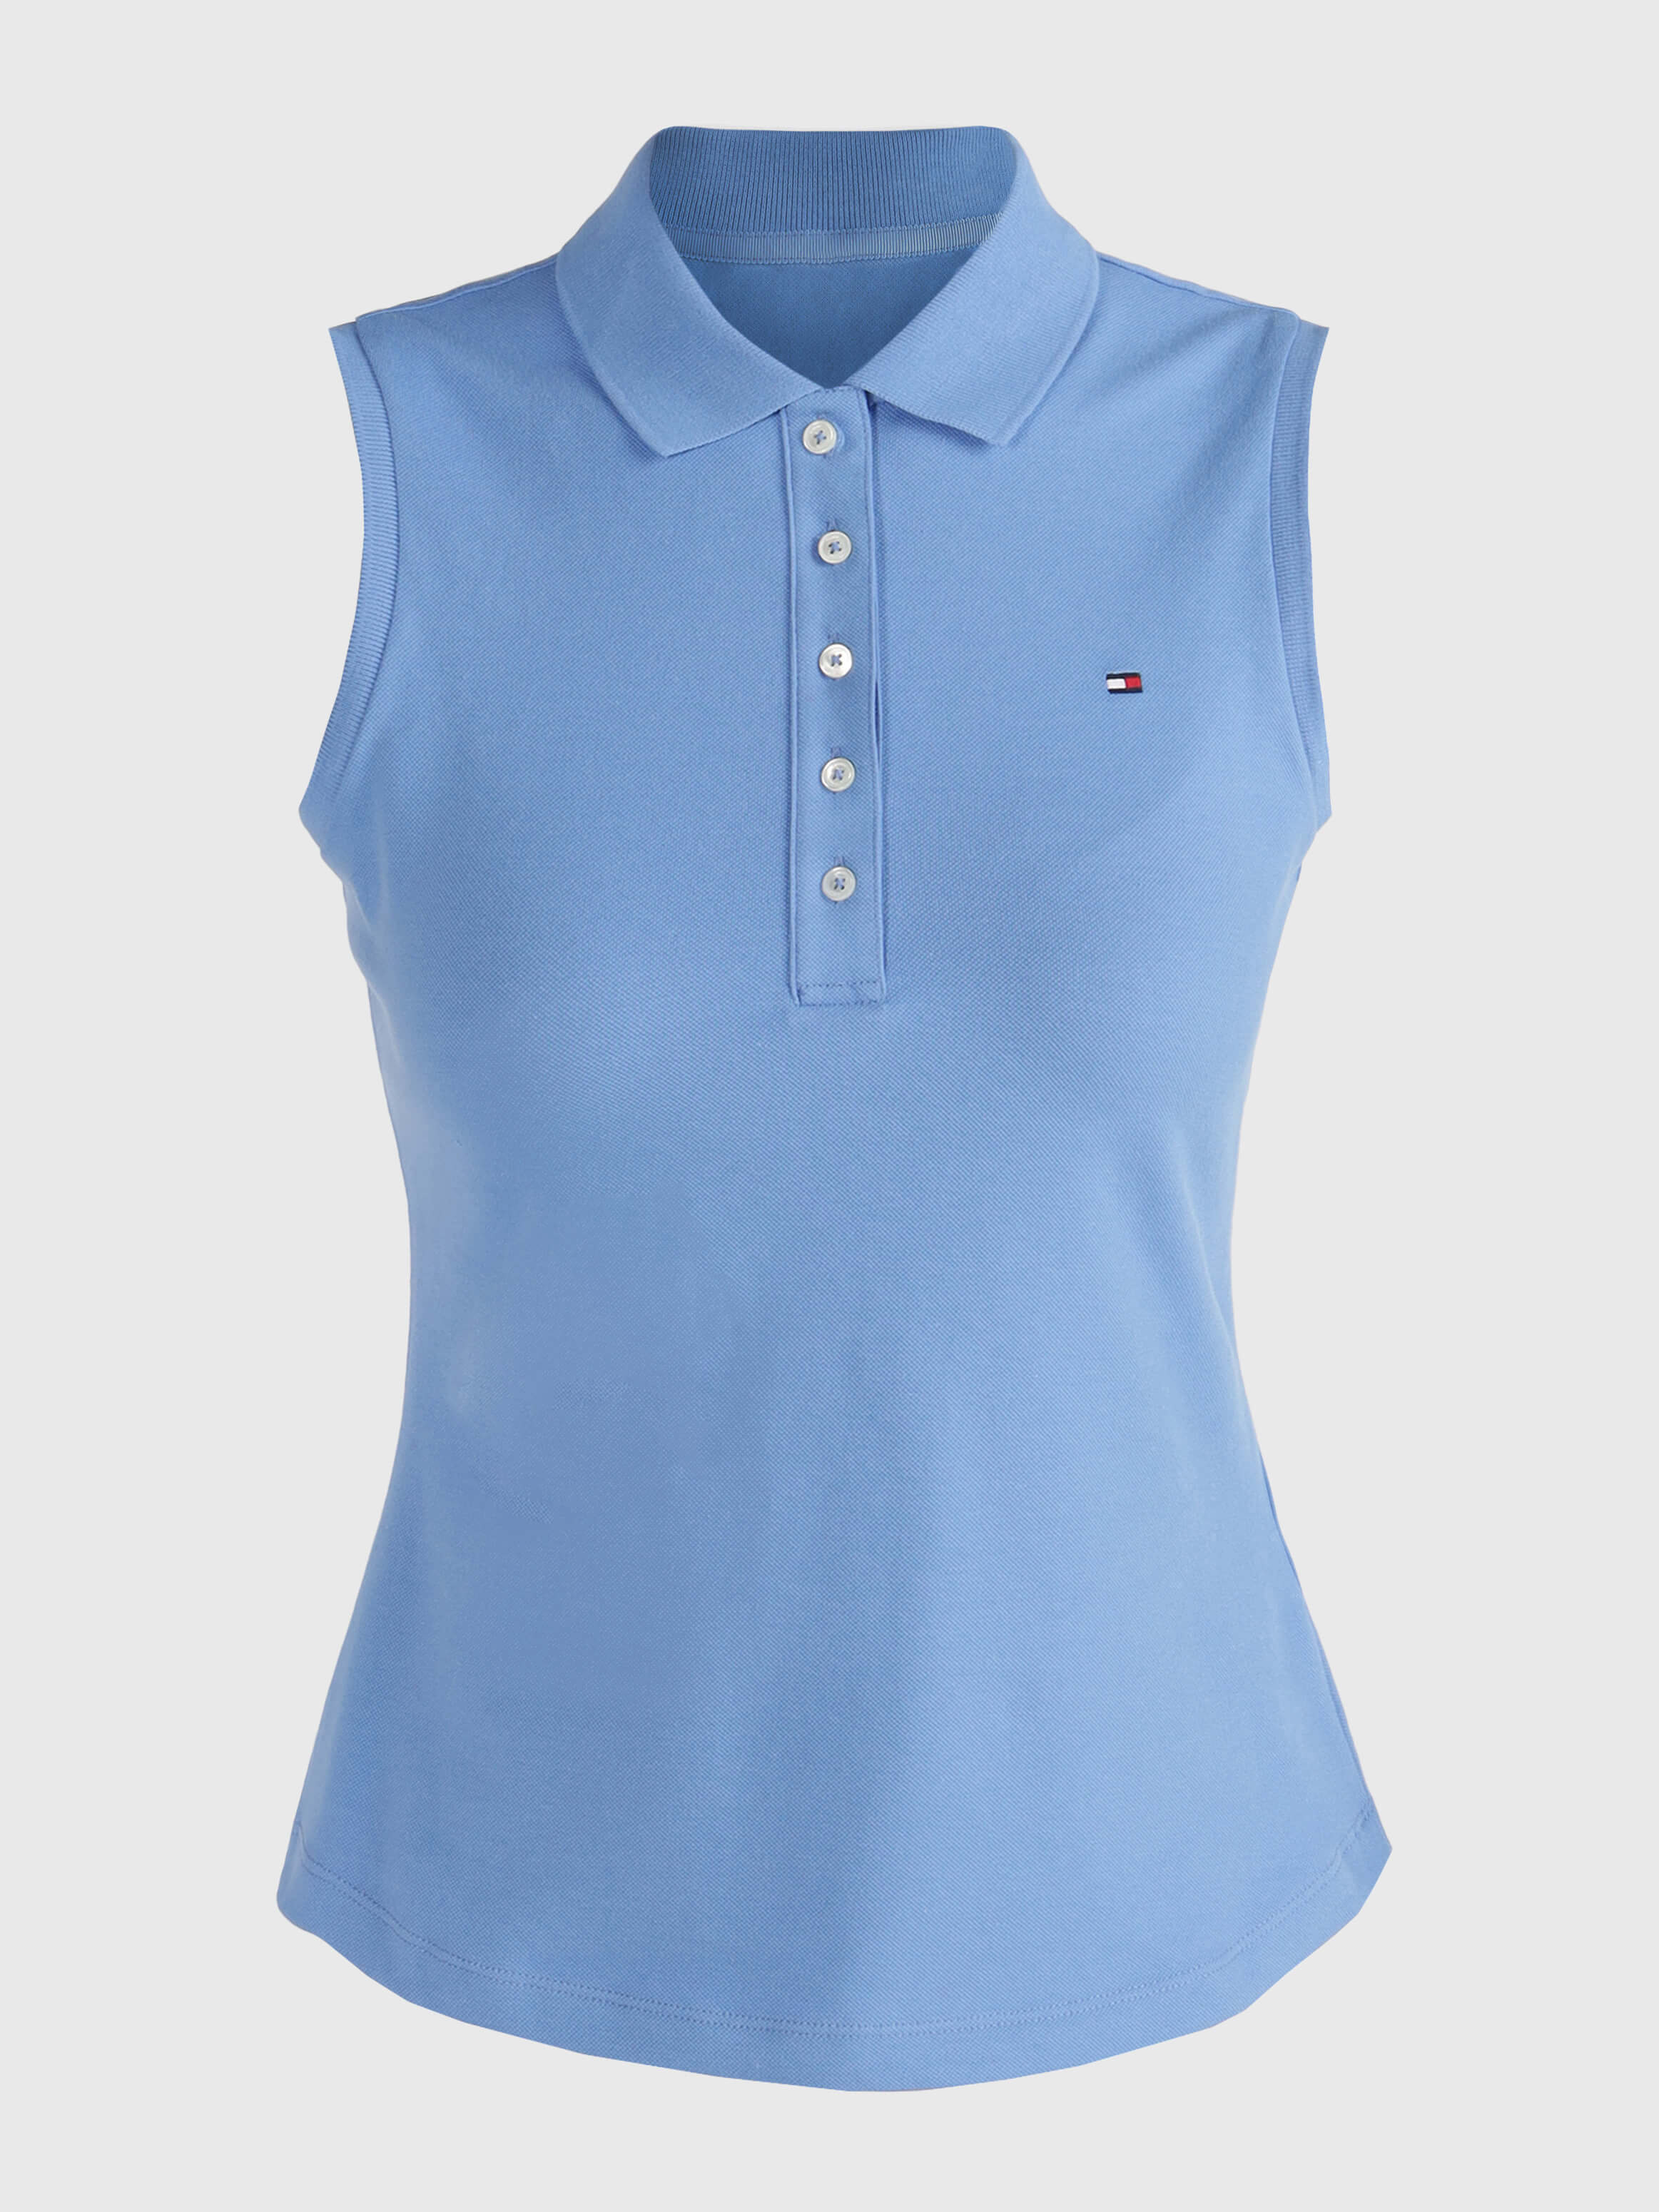 Polo 1985 Collection de corte slim sin mangas mujer Tommy Hilfiger